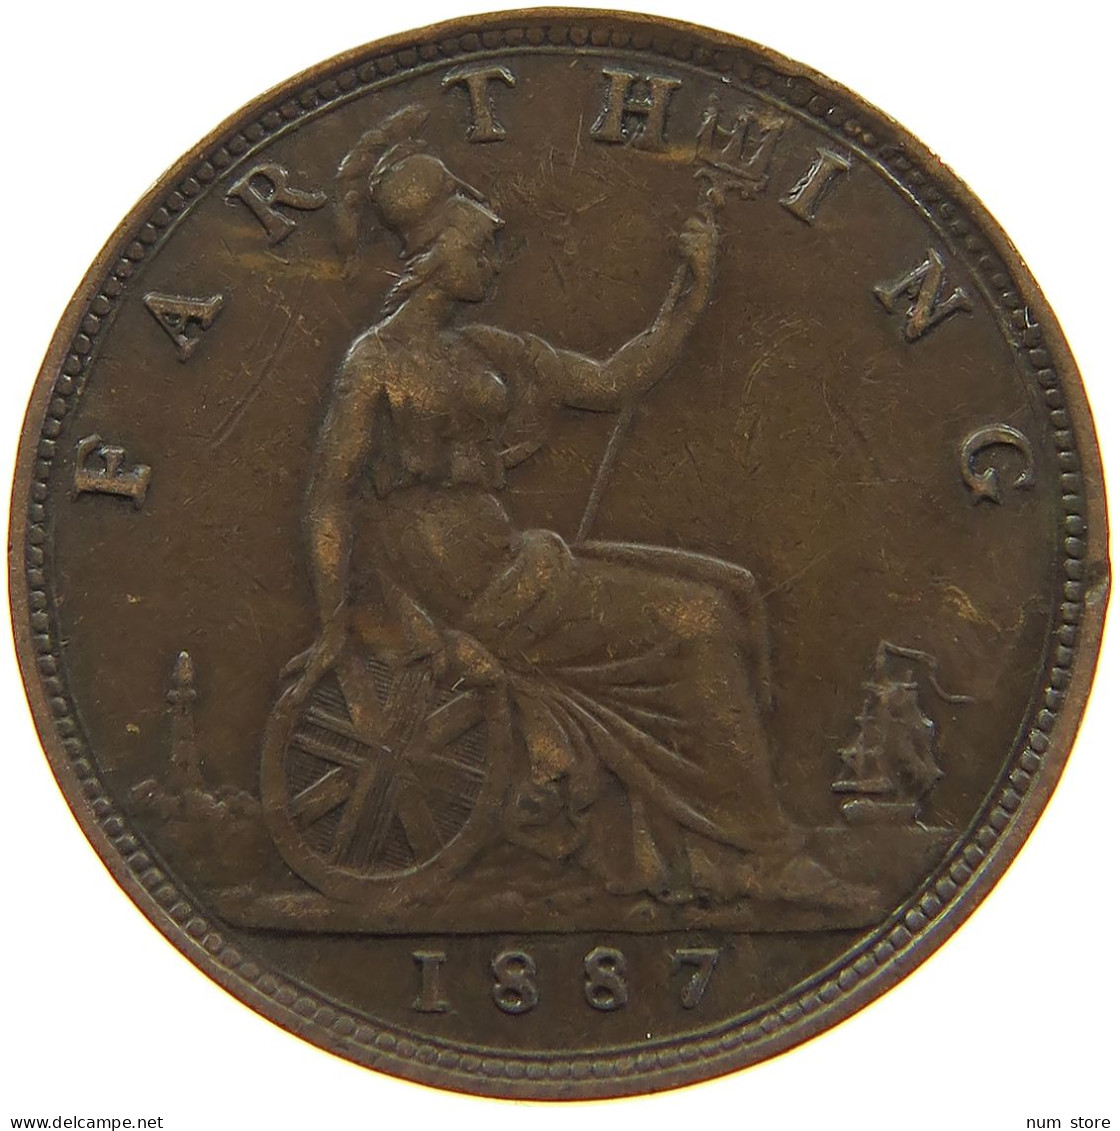 GREAT BRITAIN FARTHING 1887 Victoria 1837-1901 #a011 0845 - B. 1 Farthing